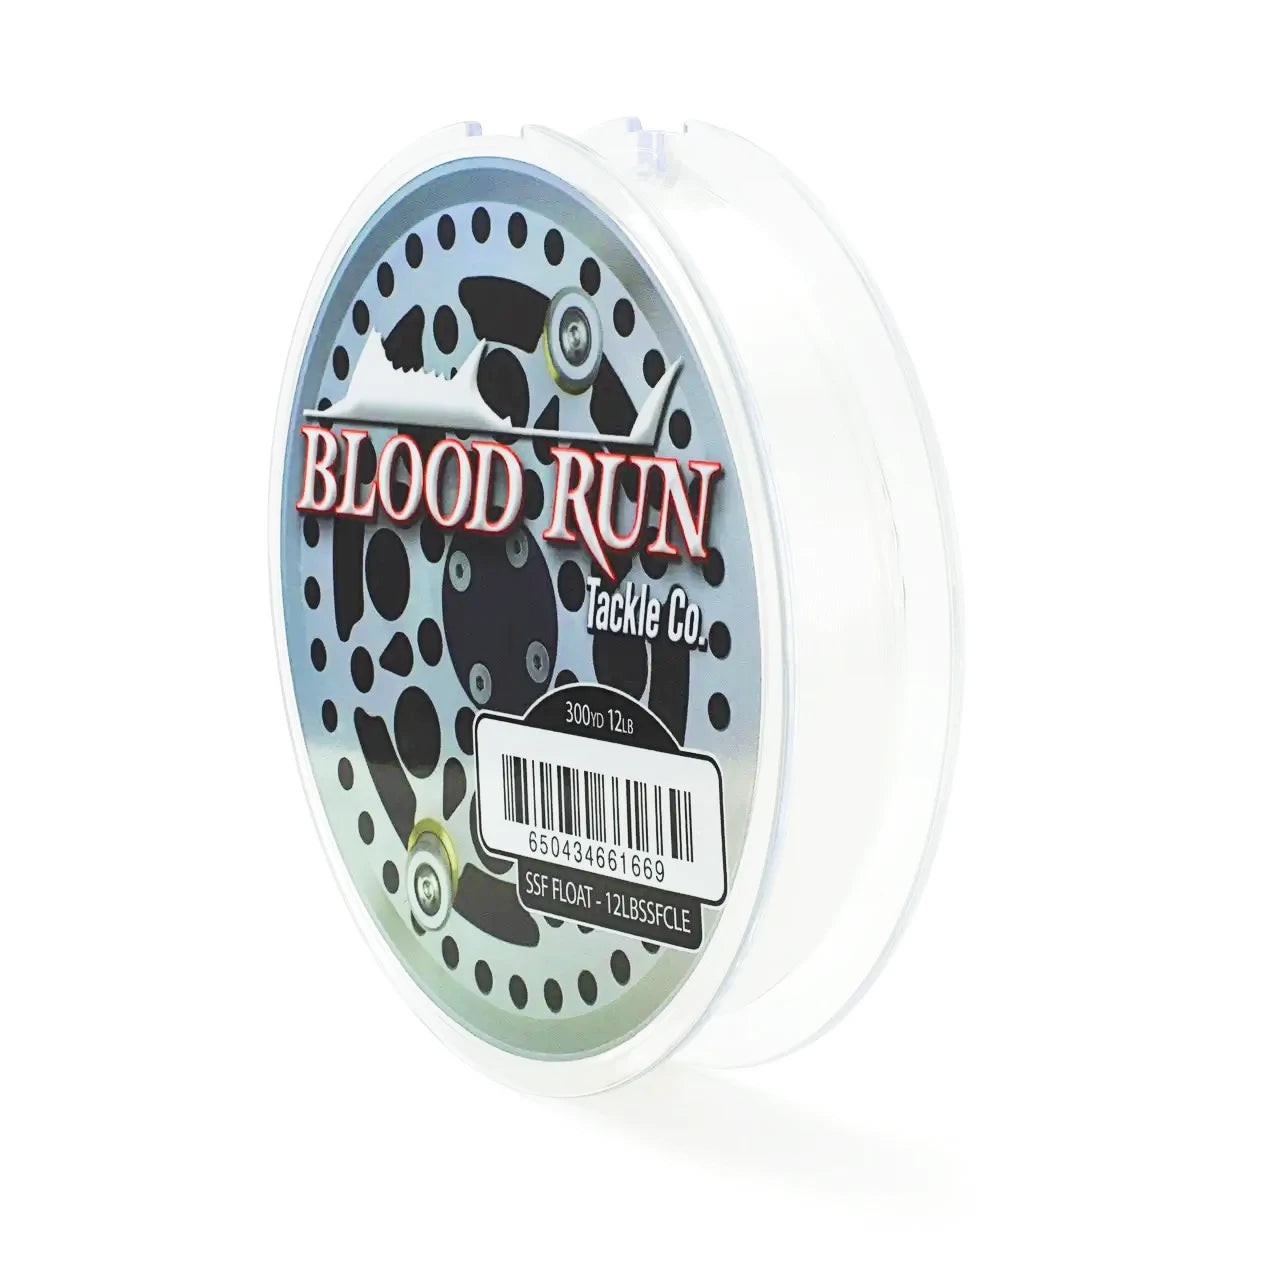 Blood Run Tackle SSF Floating Monofilament Fishing Line